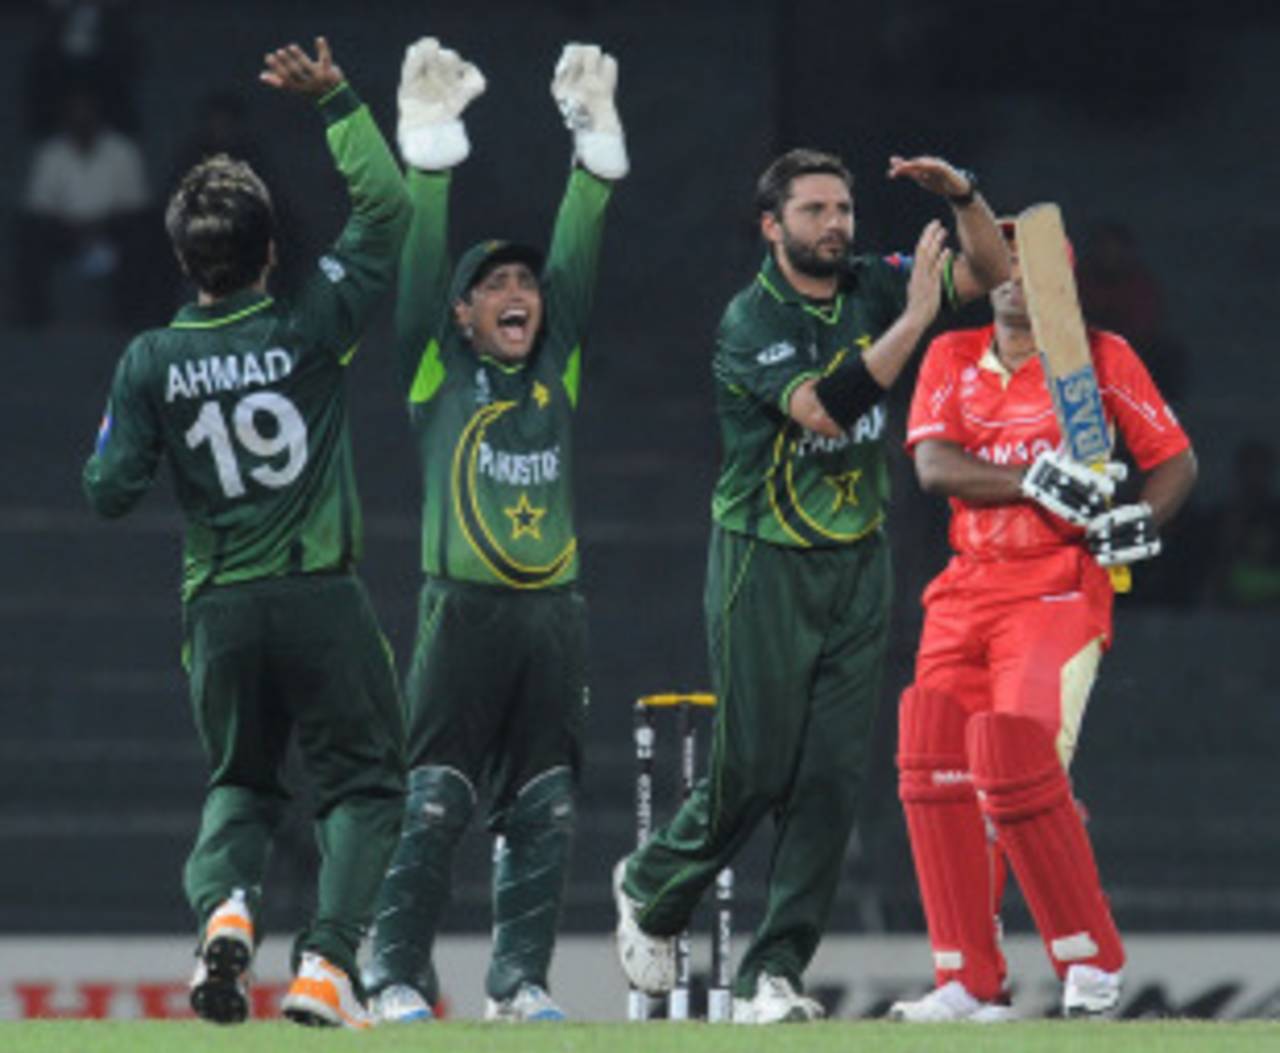 Shahid Afridi asks for a review, Canada v Pakistan, Group A, World Cup 2011, Colombo, March 3, 2011